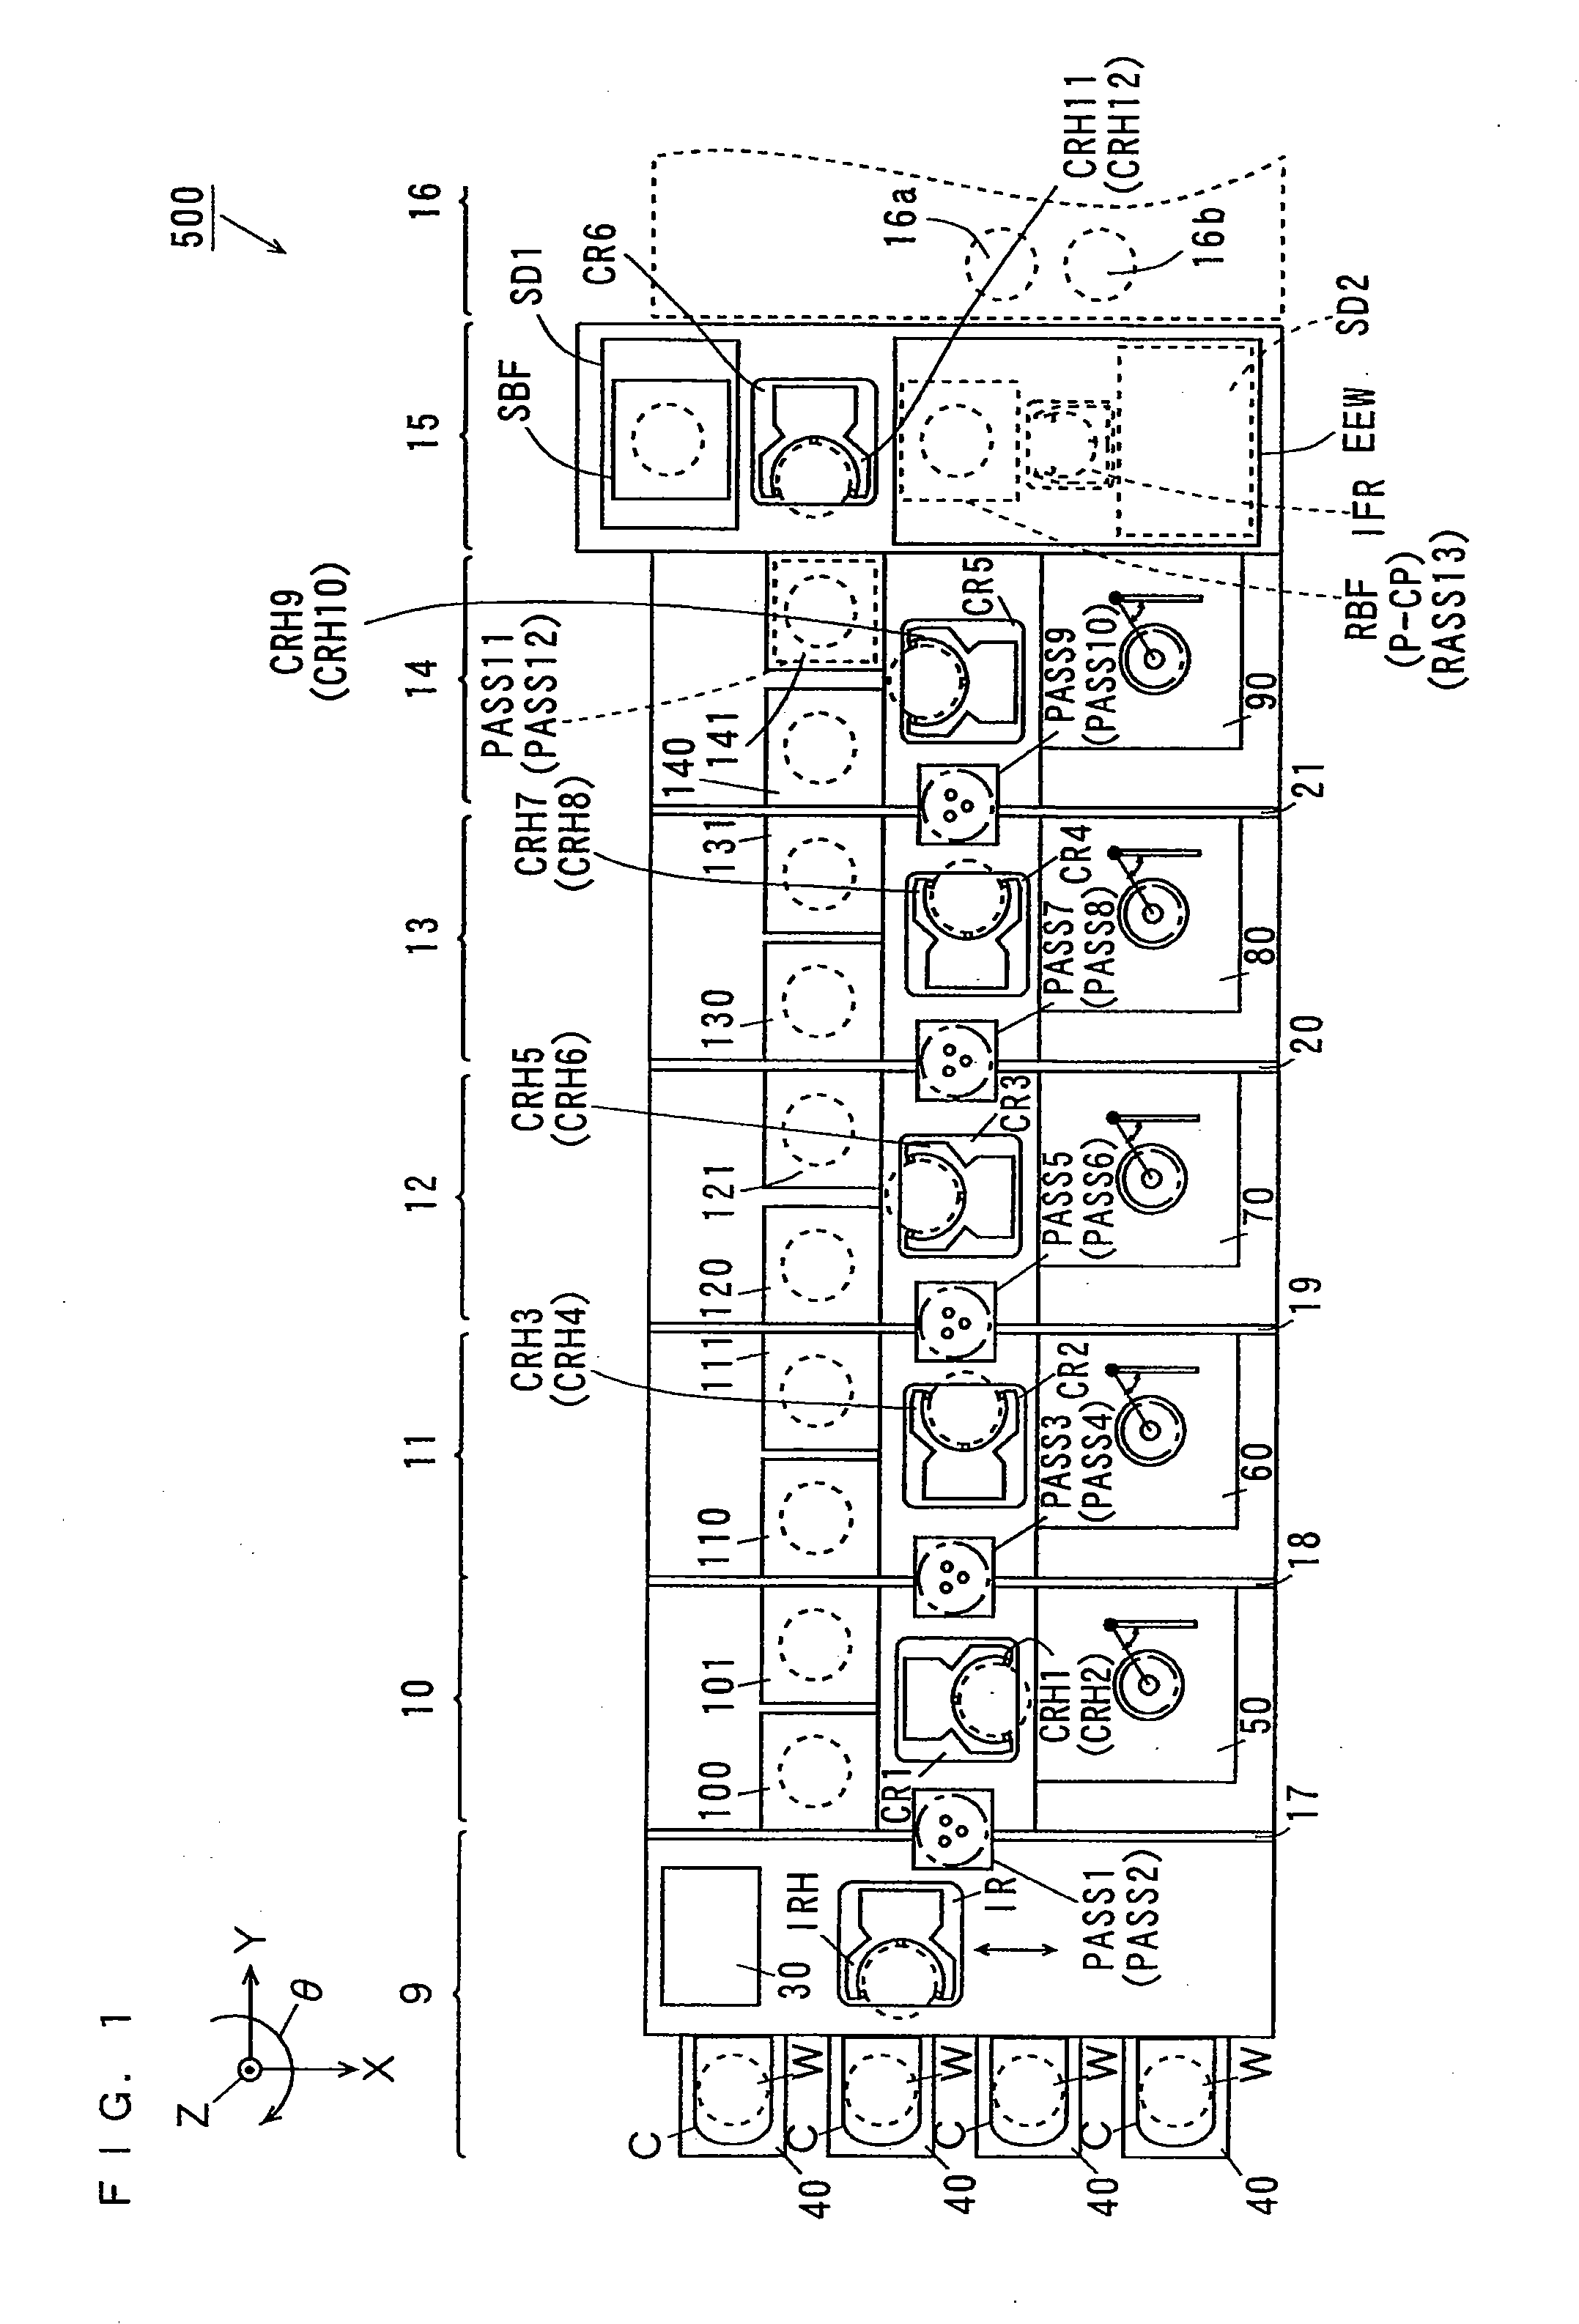 Substrate cleaning and processing apparatus with magnetically controlled spin chuck holding pins